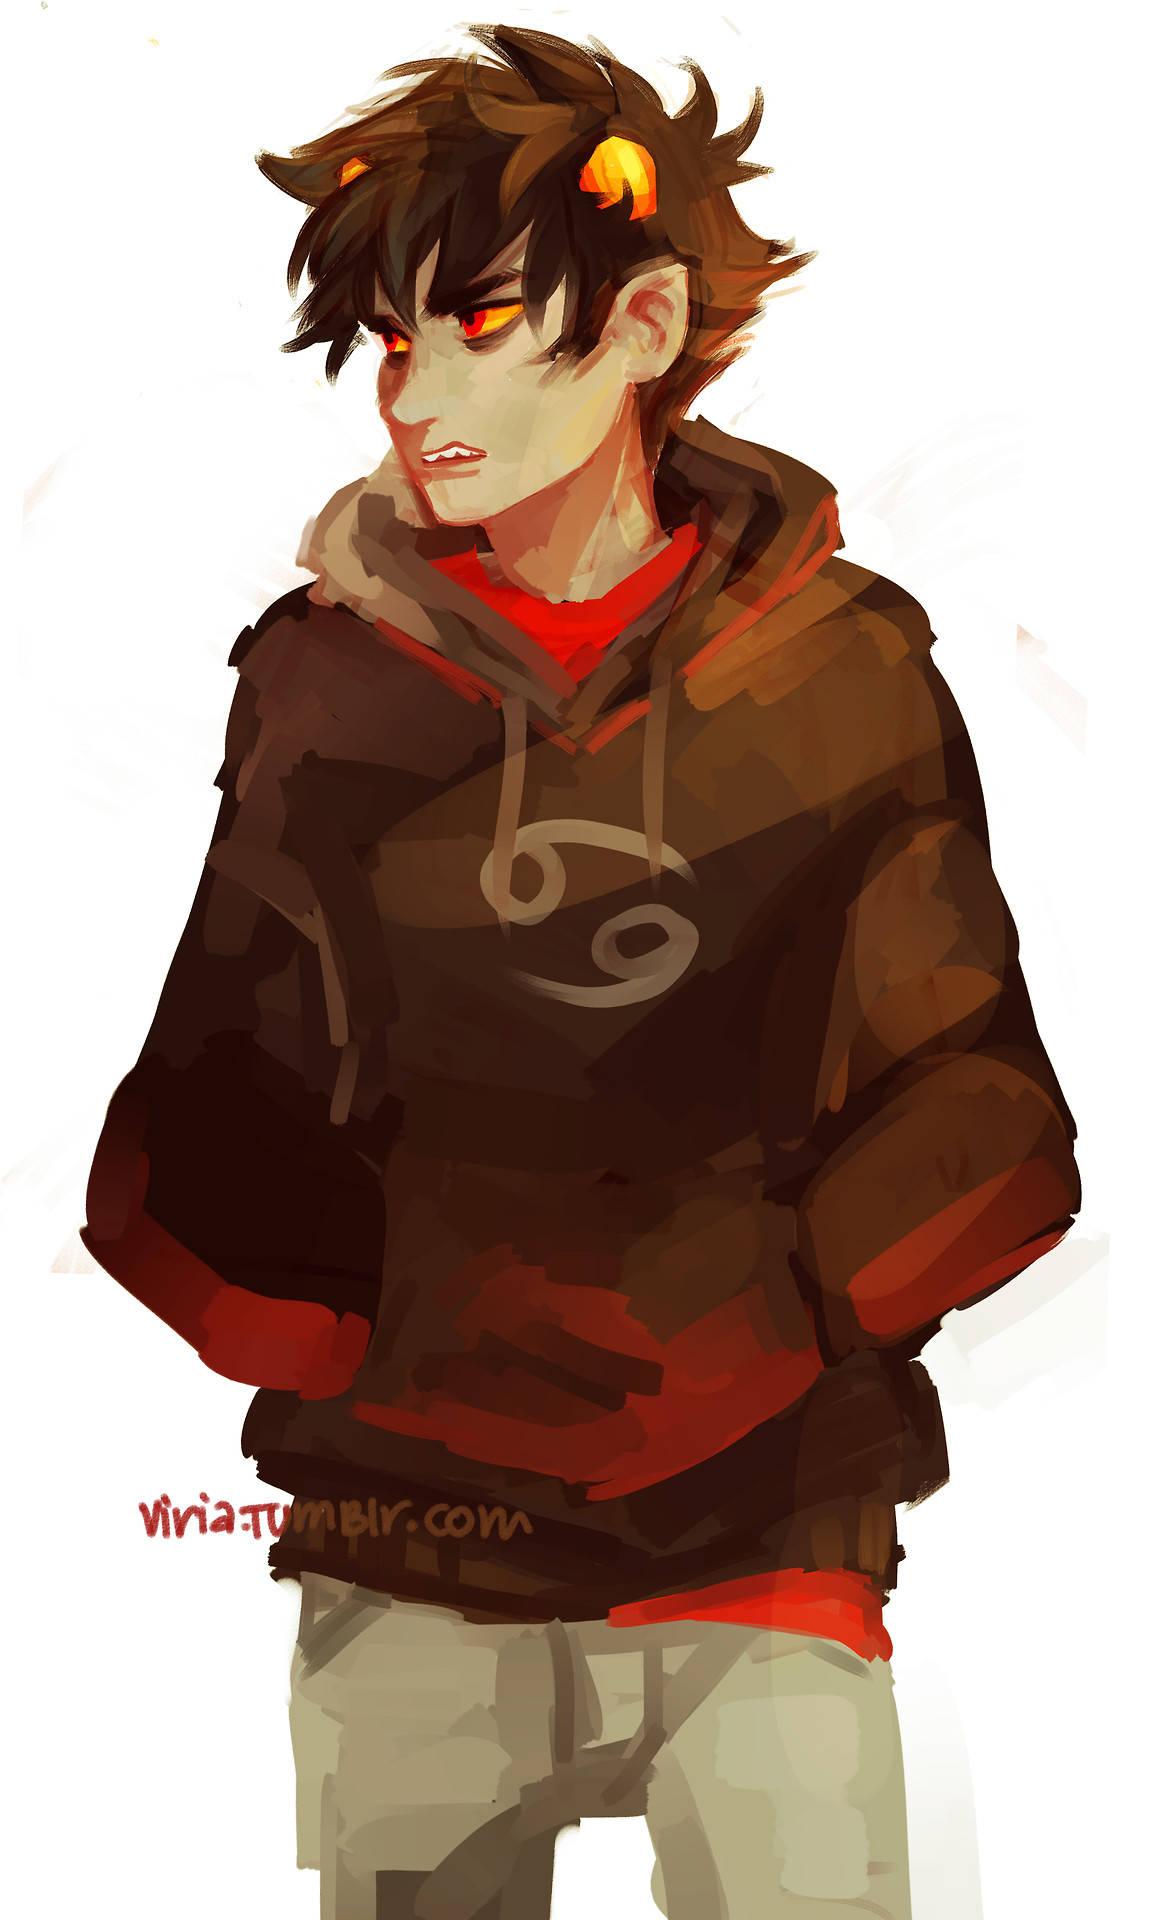 1152x1920 Karkat Vantas images Karkitty in a hoodie HD wallpaper and background photos